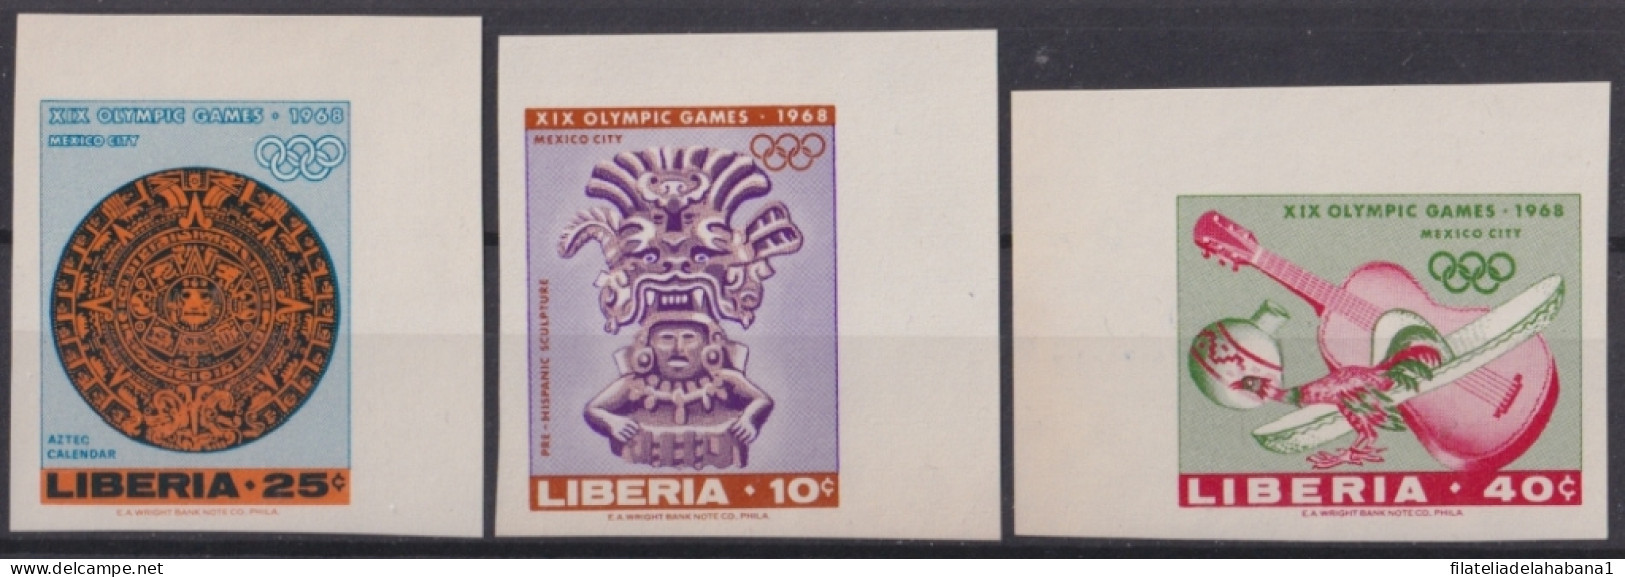 F-EX49271 LIBERIA MNH 1968 OLYMPIC GAMES IMPERFORATED ARCHEOLOGY - Sommer 1968: Mexico